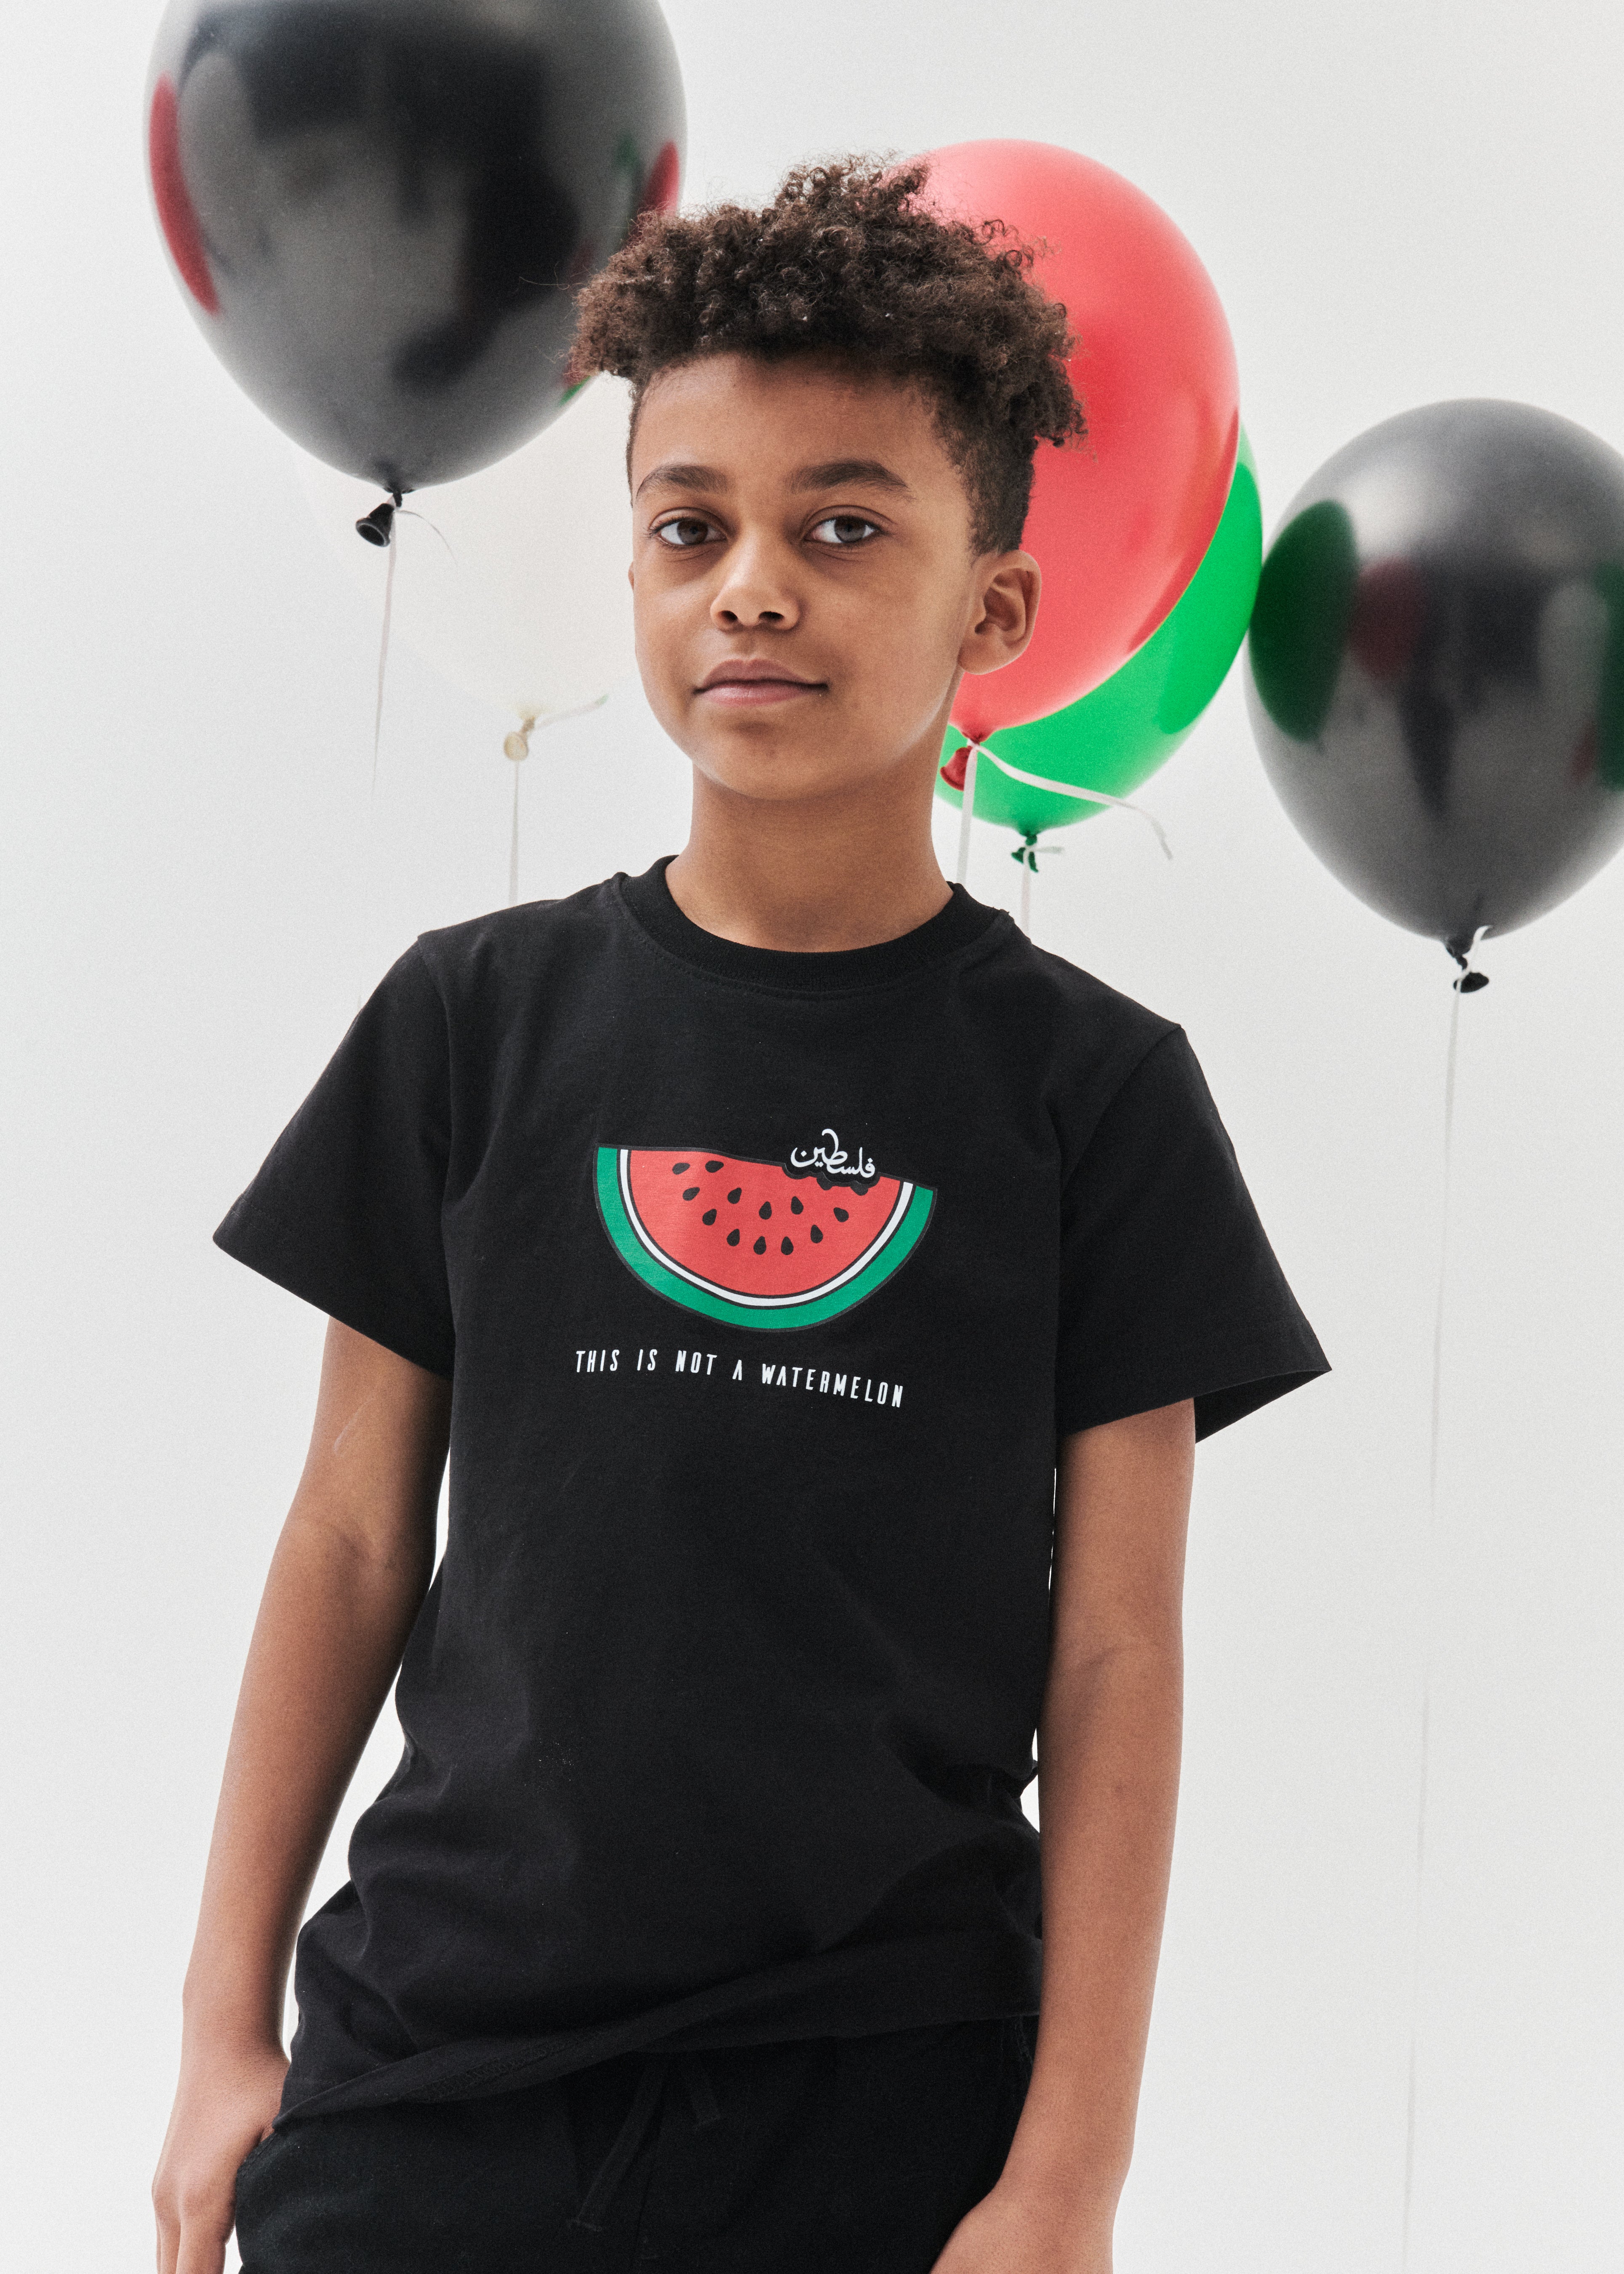 This is not a watermelon - Kids T-shirt